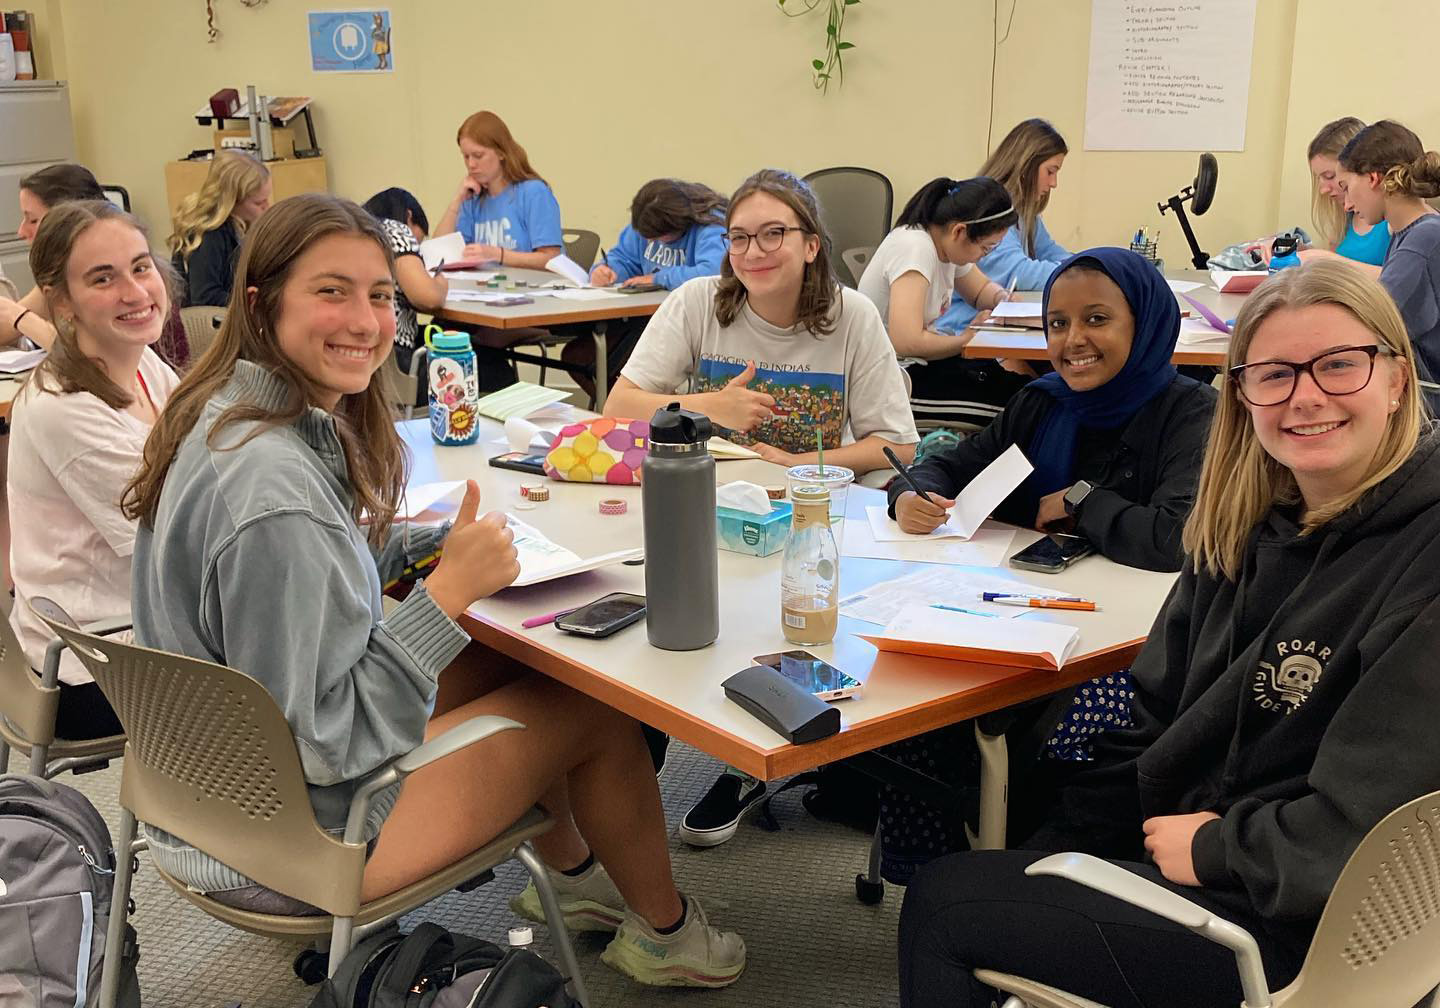 The UNC Writing and Learning Center provides a variety of services to help students excel, including personalized academic coaching tailored to your needs. We also offer peer tutoring, group workshops, and online resources that help students with everything from test prep to STEM courses.